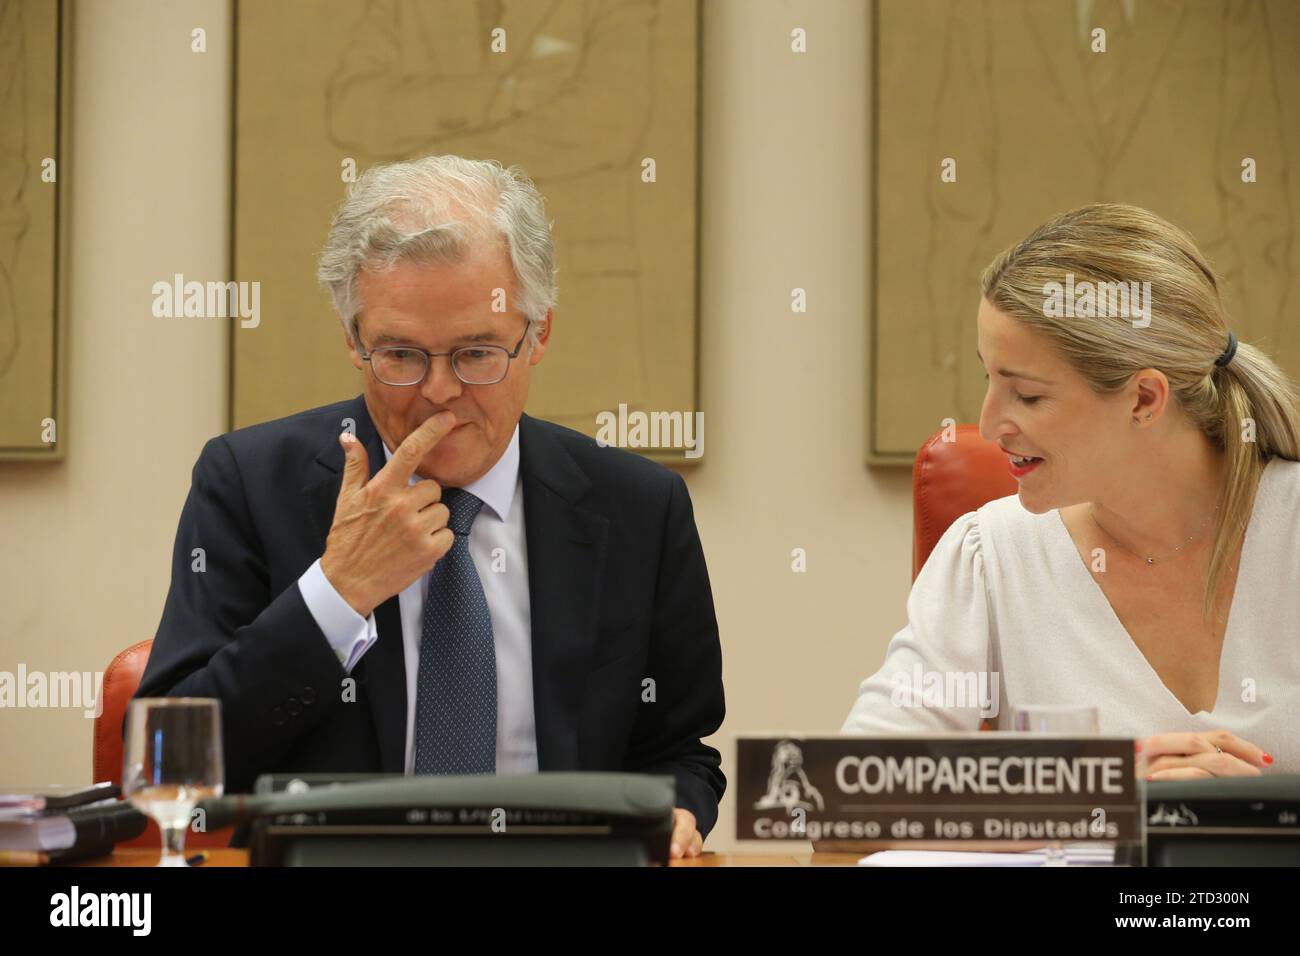 Madrid, 09/18/2019. Congress of Deputies. Appearance of Sebastián Albella, president of the CNMV. In the image, together with the president of the Economy and Business Commission, María Muñoz. Photo: Jaime García. ARCHDC. Credit: Album / Archivo ABC / Jaime García Stock Photo